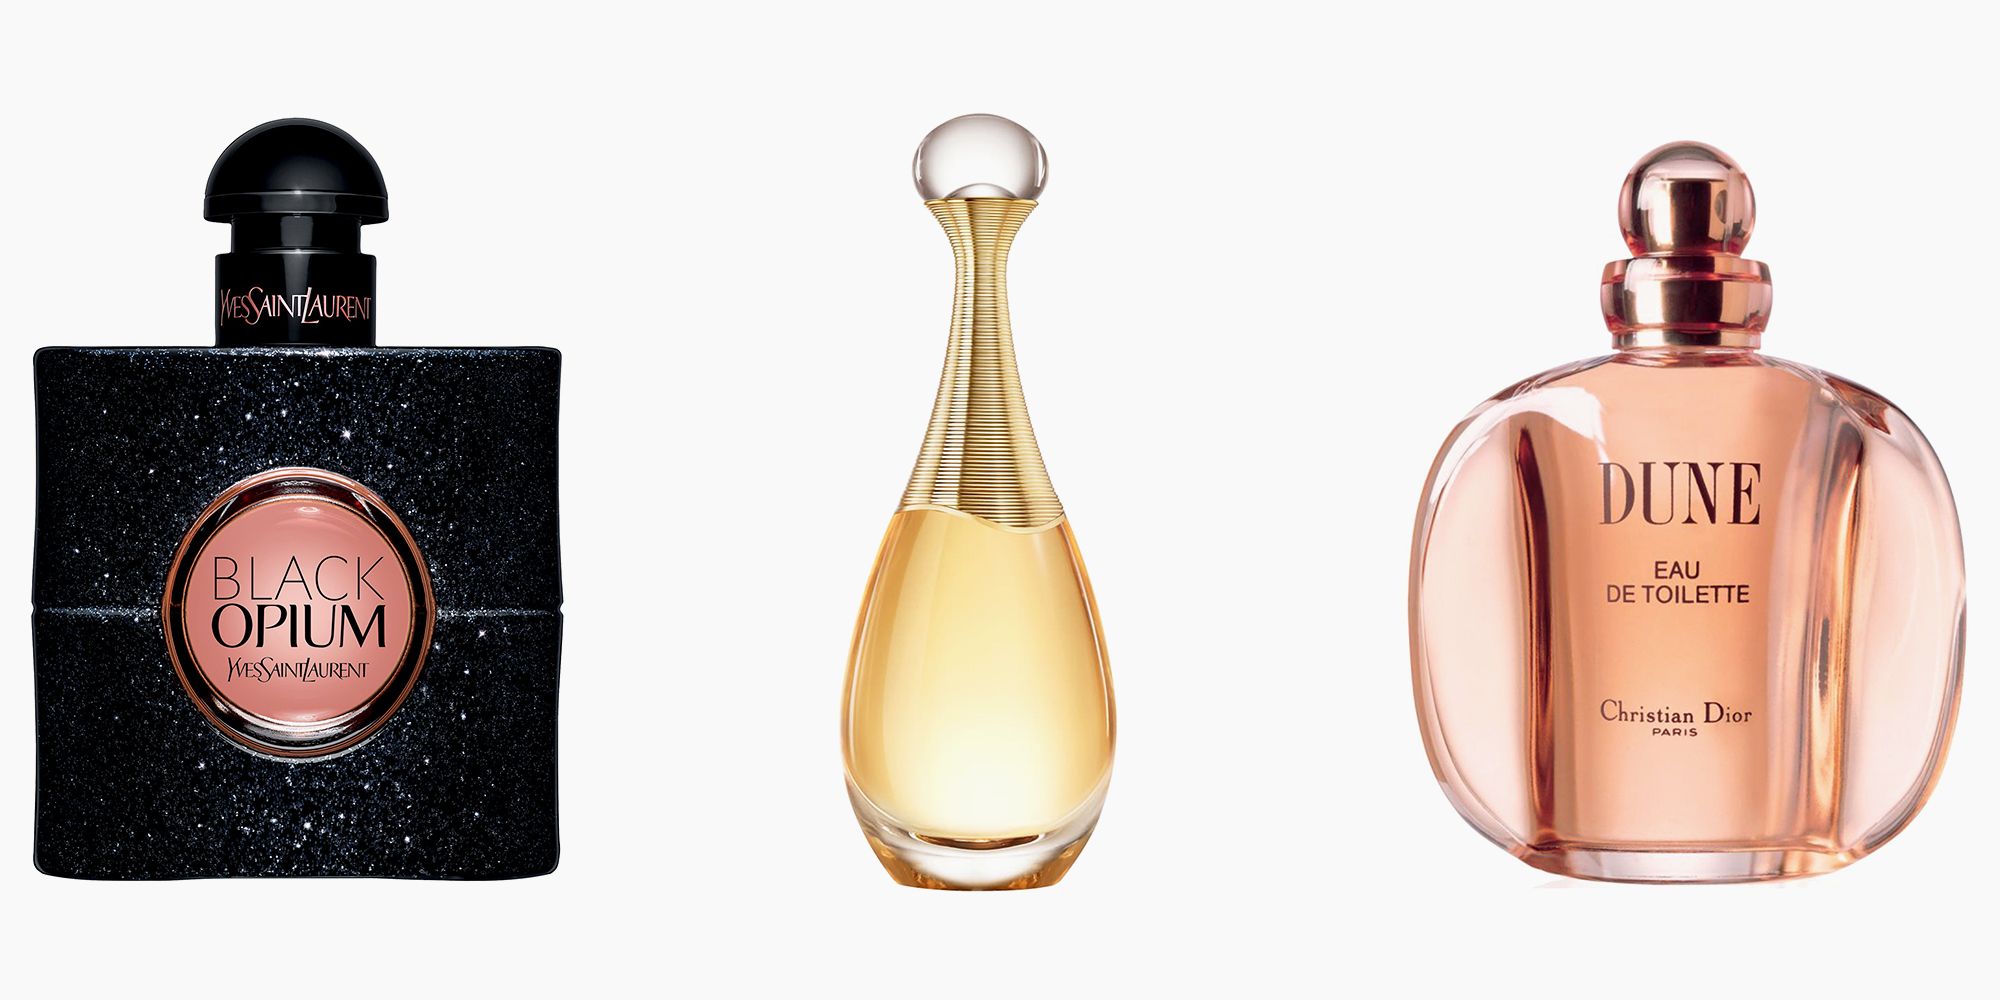 20 Fragrances That Smell Like A Dream